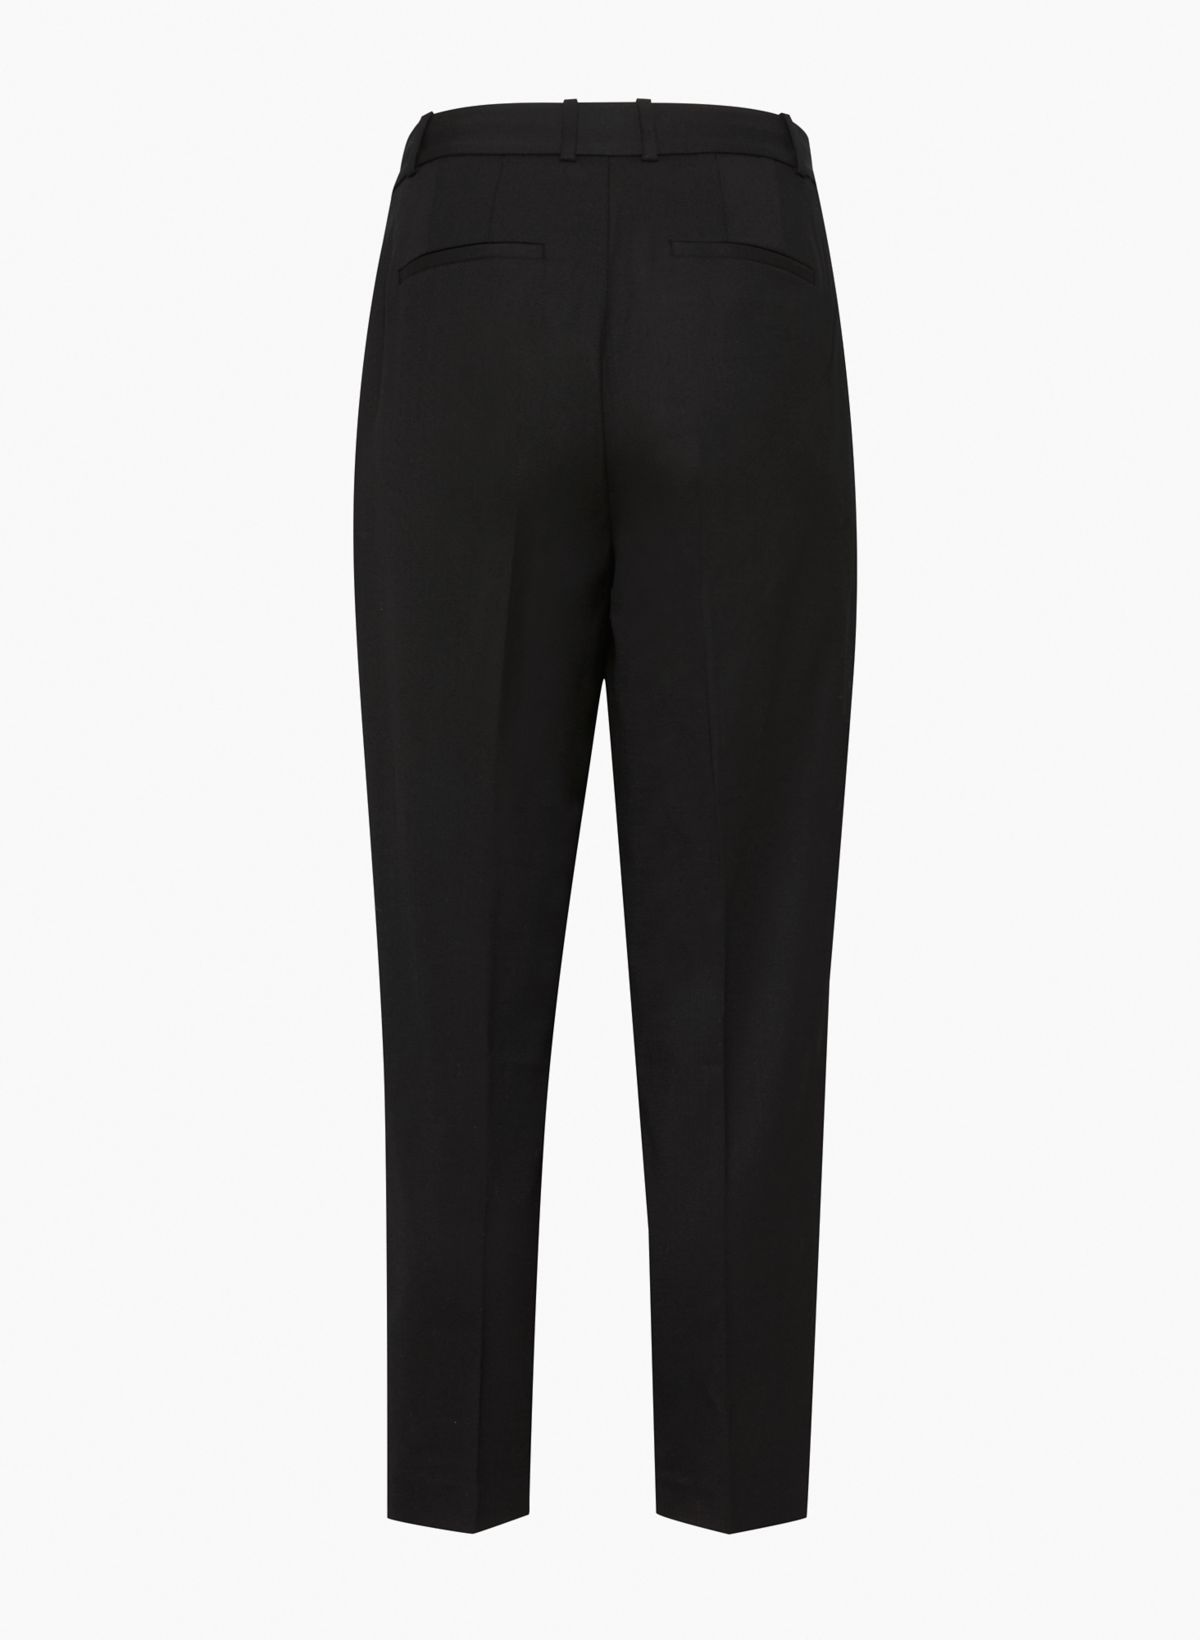 VOGO Athletica Pull On Leggings Womens size and similar items